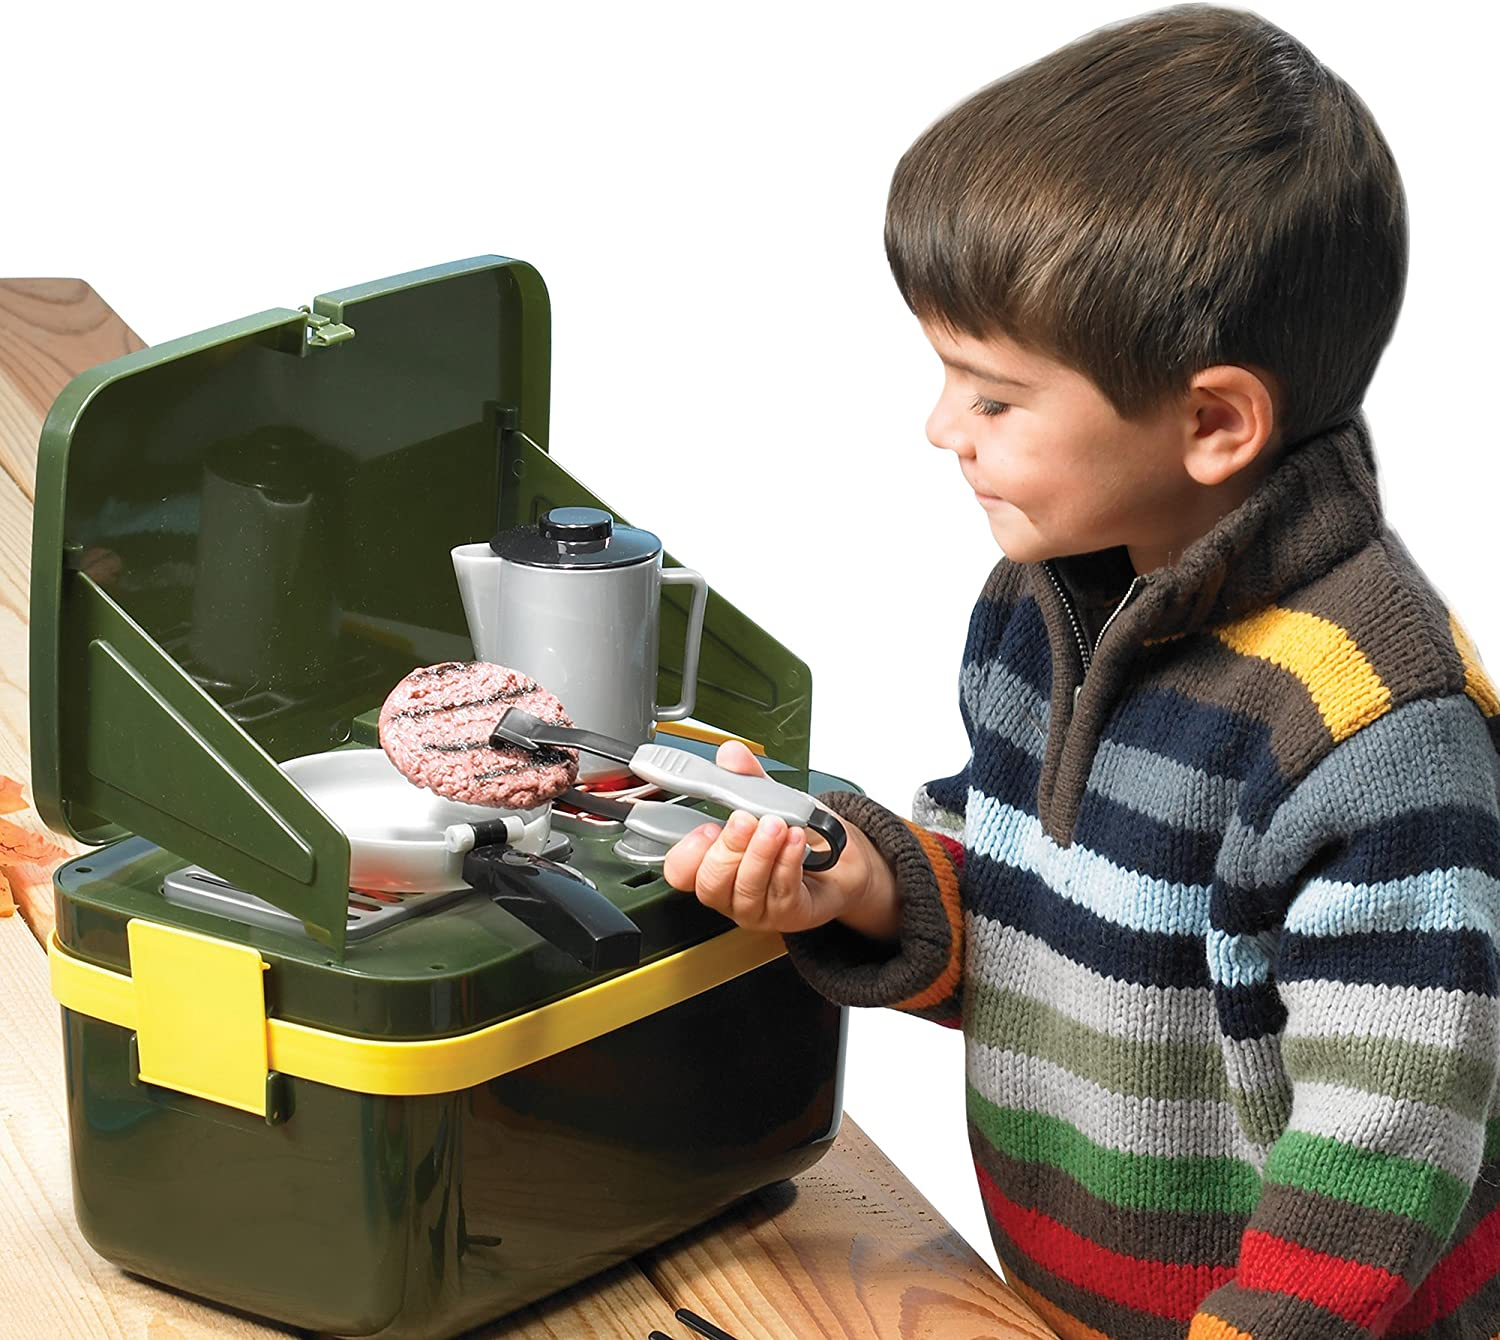 pretend camping grill toy for kids